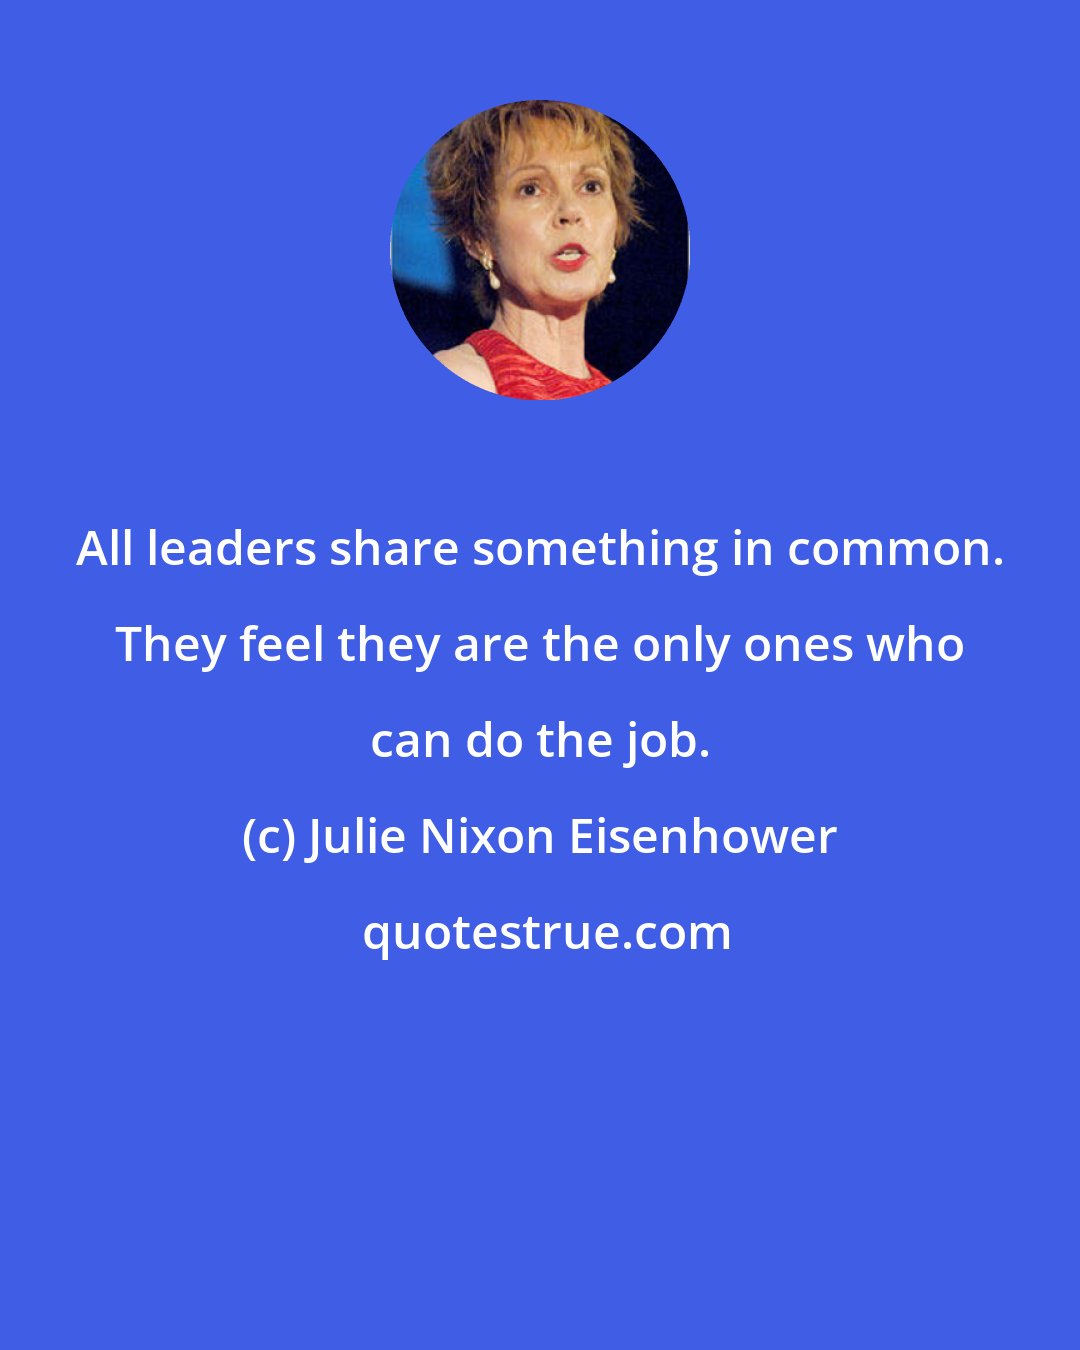 Julie Nixon Eisenhower: All leaders share something in common. They feel they are the only ones who can do the job.